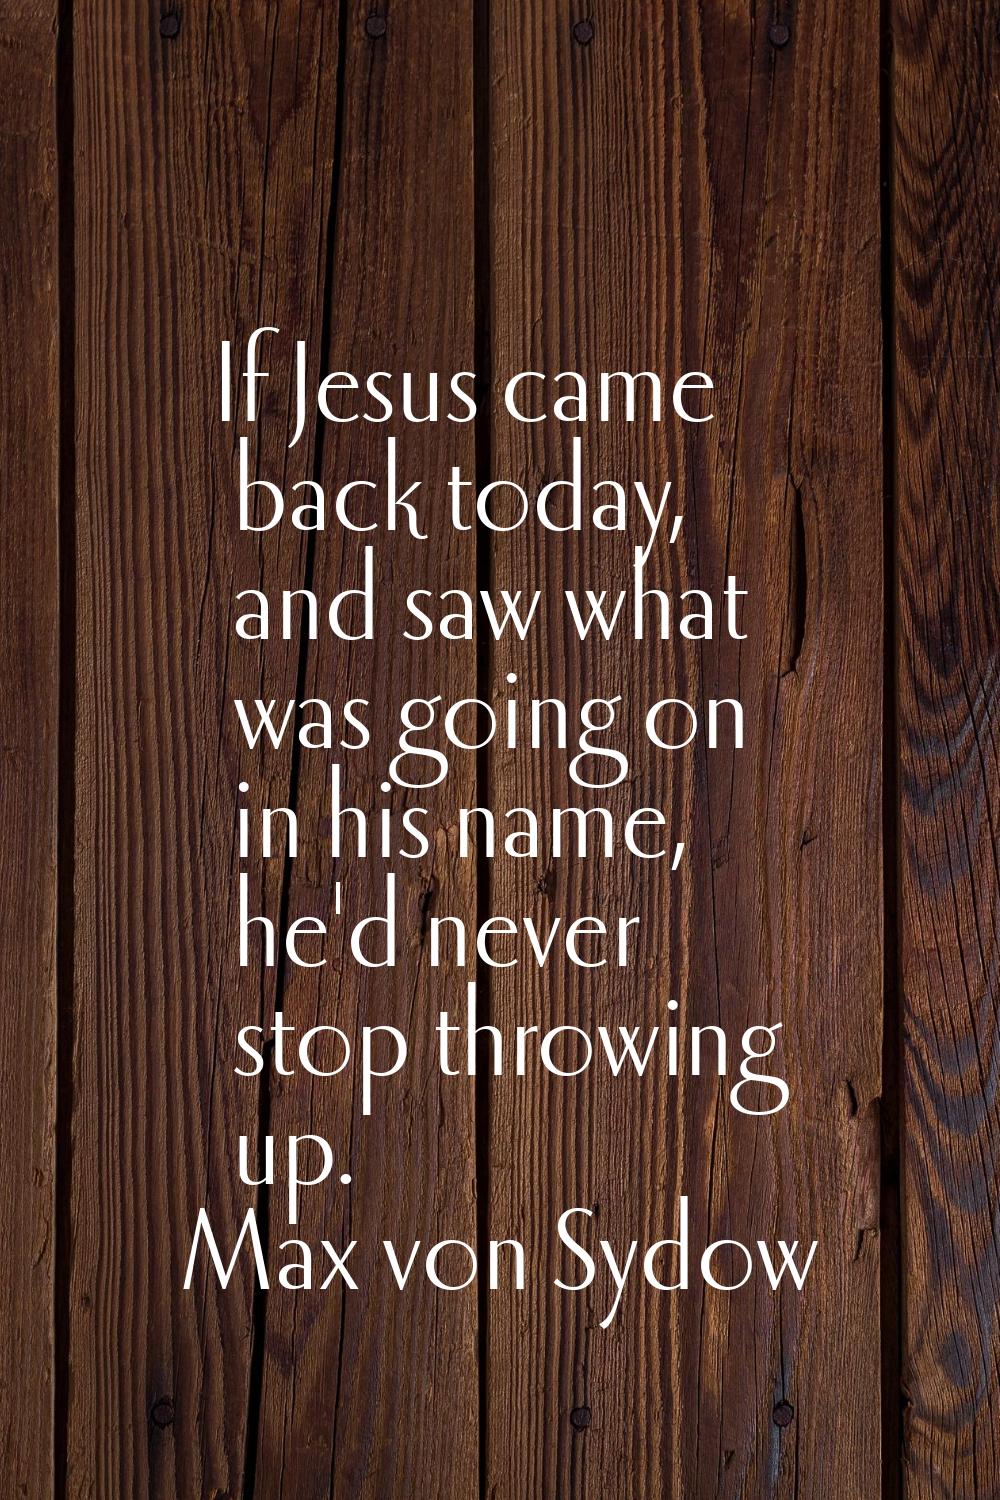 If Jesus came back today, and saw what was going on in his name, he'd never stop throwing up.